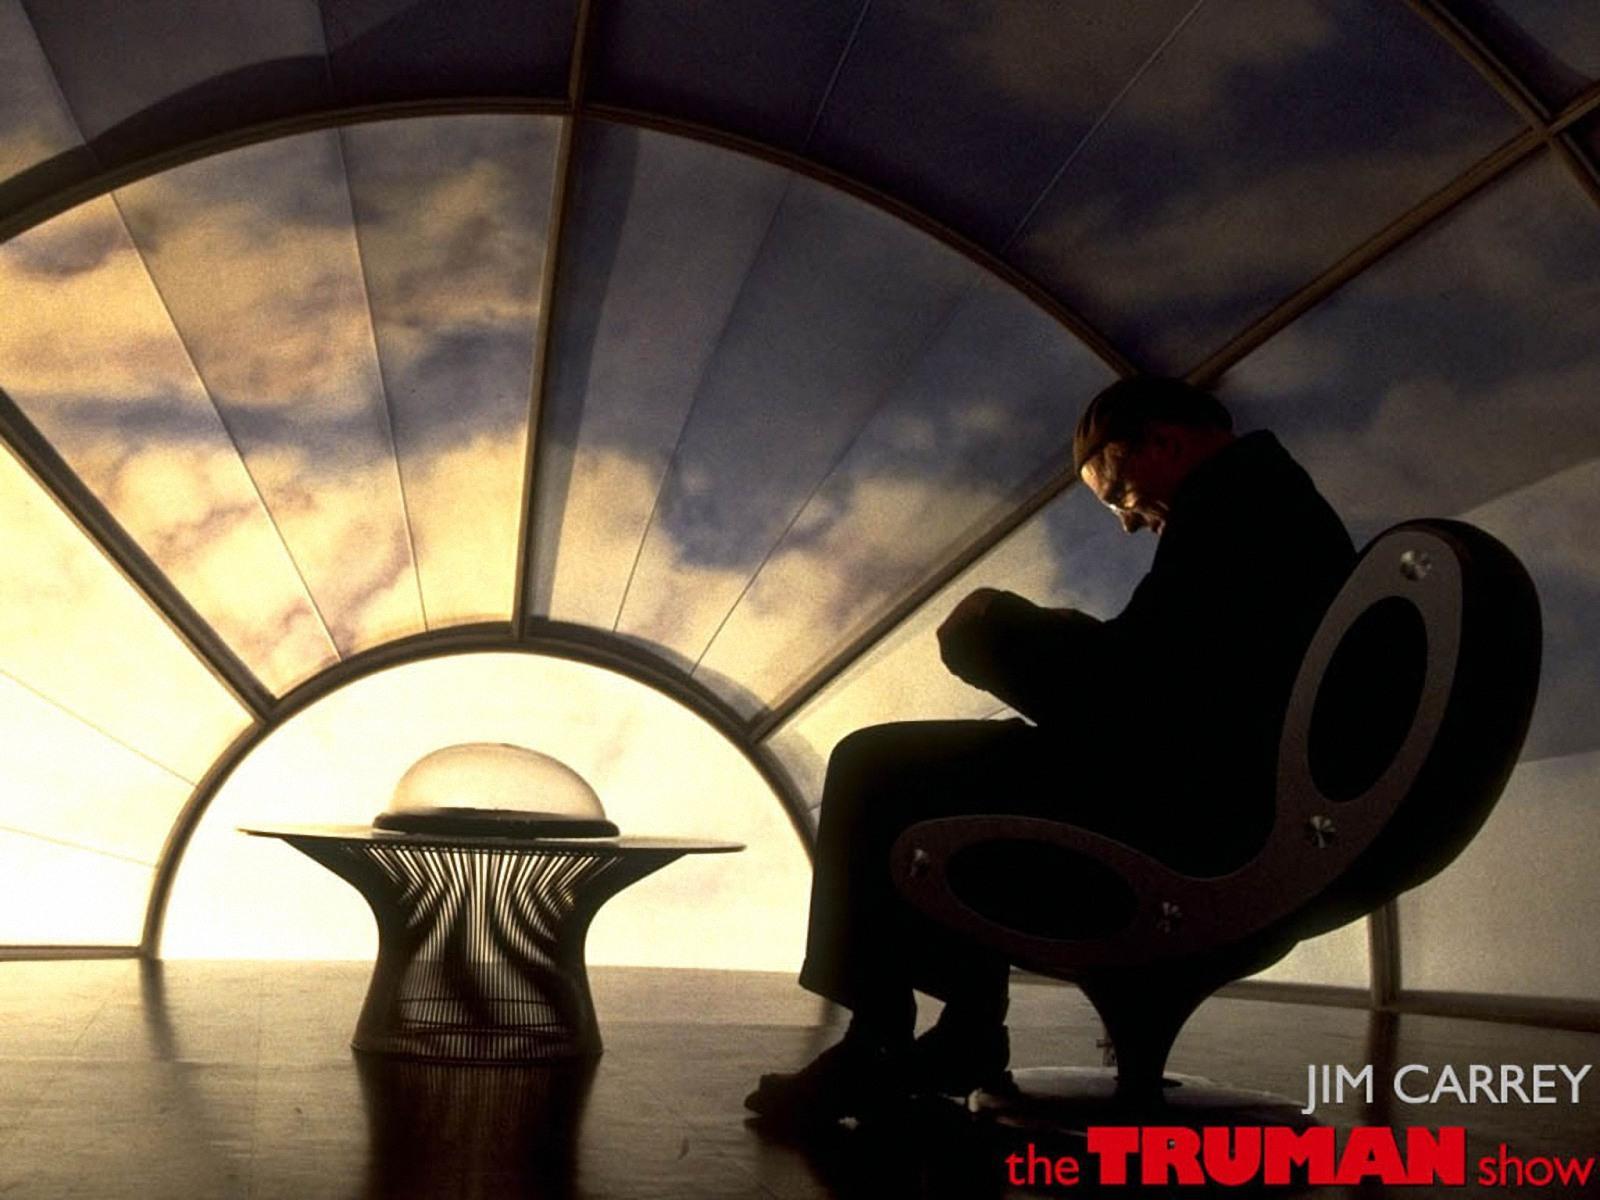 The Truman Show Wallpaper, The Truman Show Wallpaper & Picture